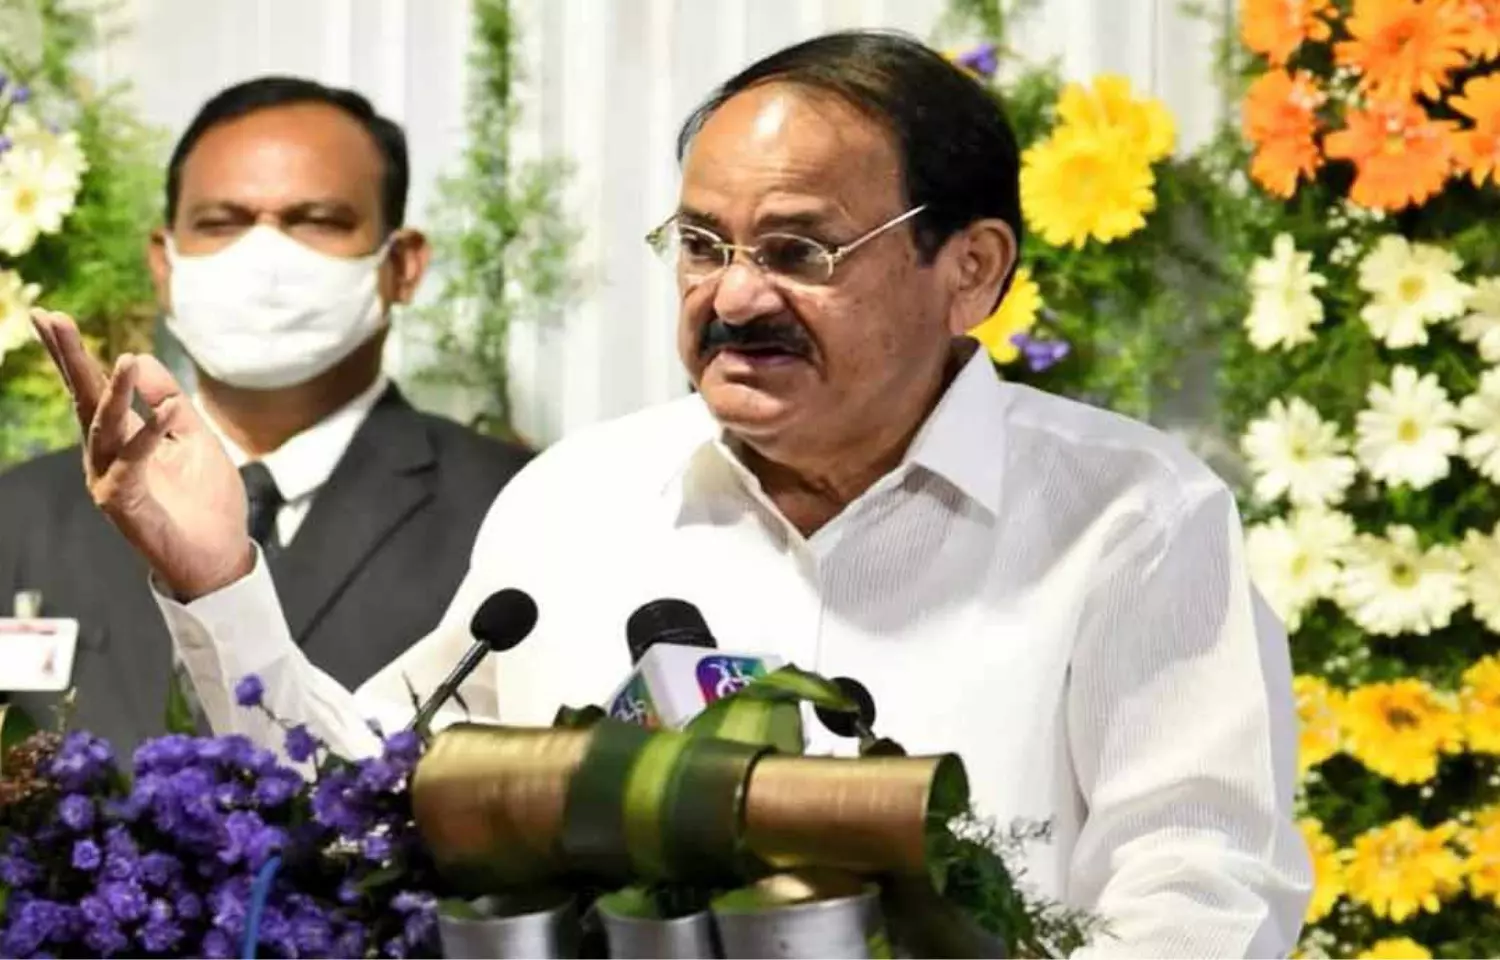 VP Naidu stresses on need for making healthcare affordable, accessible to all